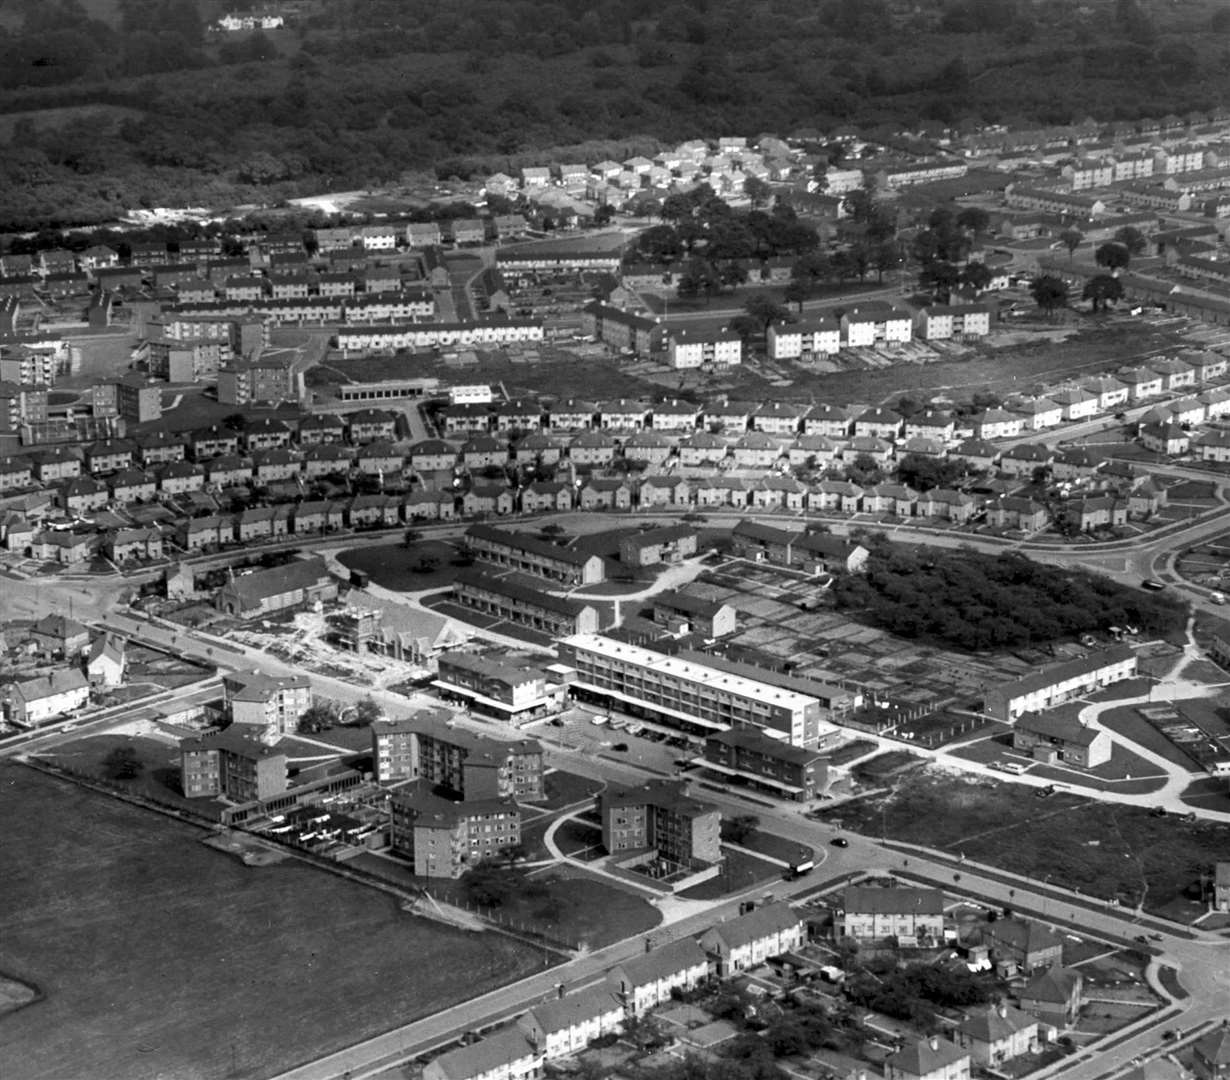 Aerial view of Shepway when it was being built